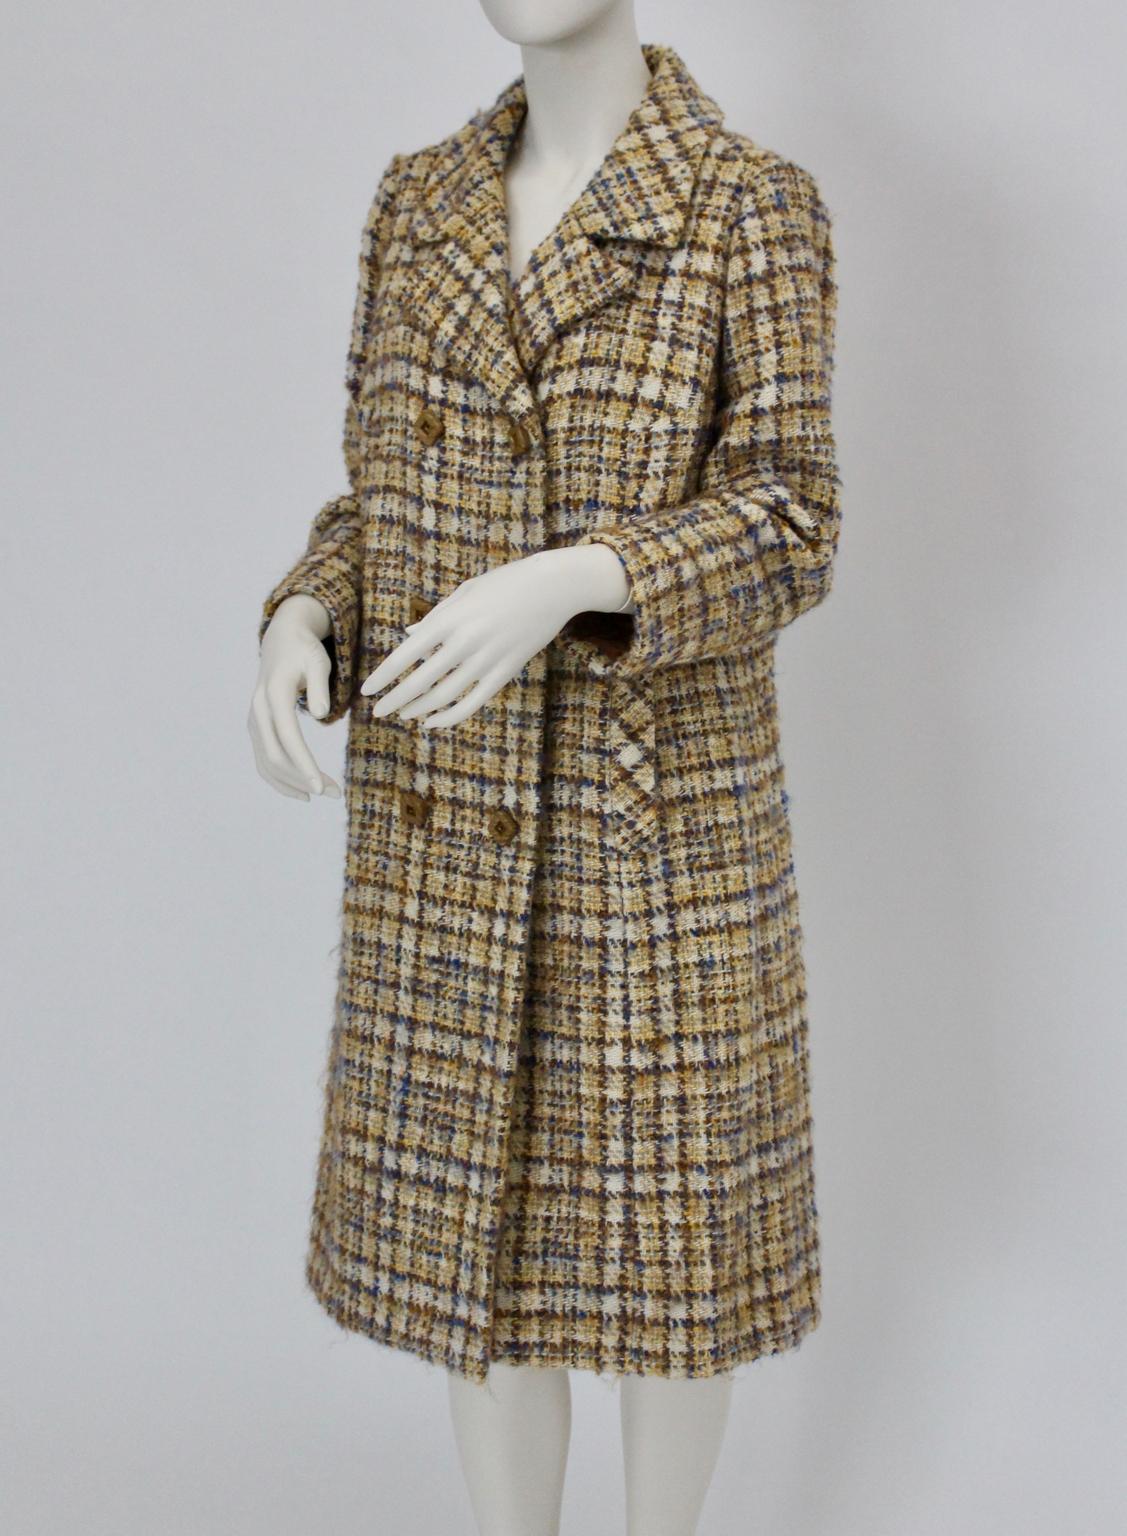 Brown Herbert Schill Wool Tweed Boucle Double Breasted Coat circa 1968 Vienna For Sale